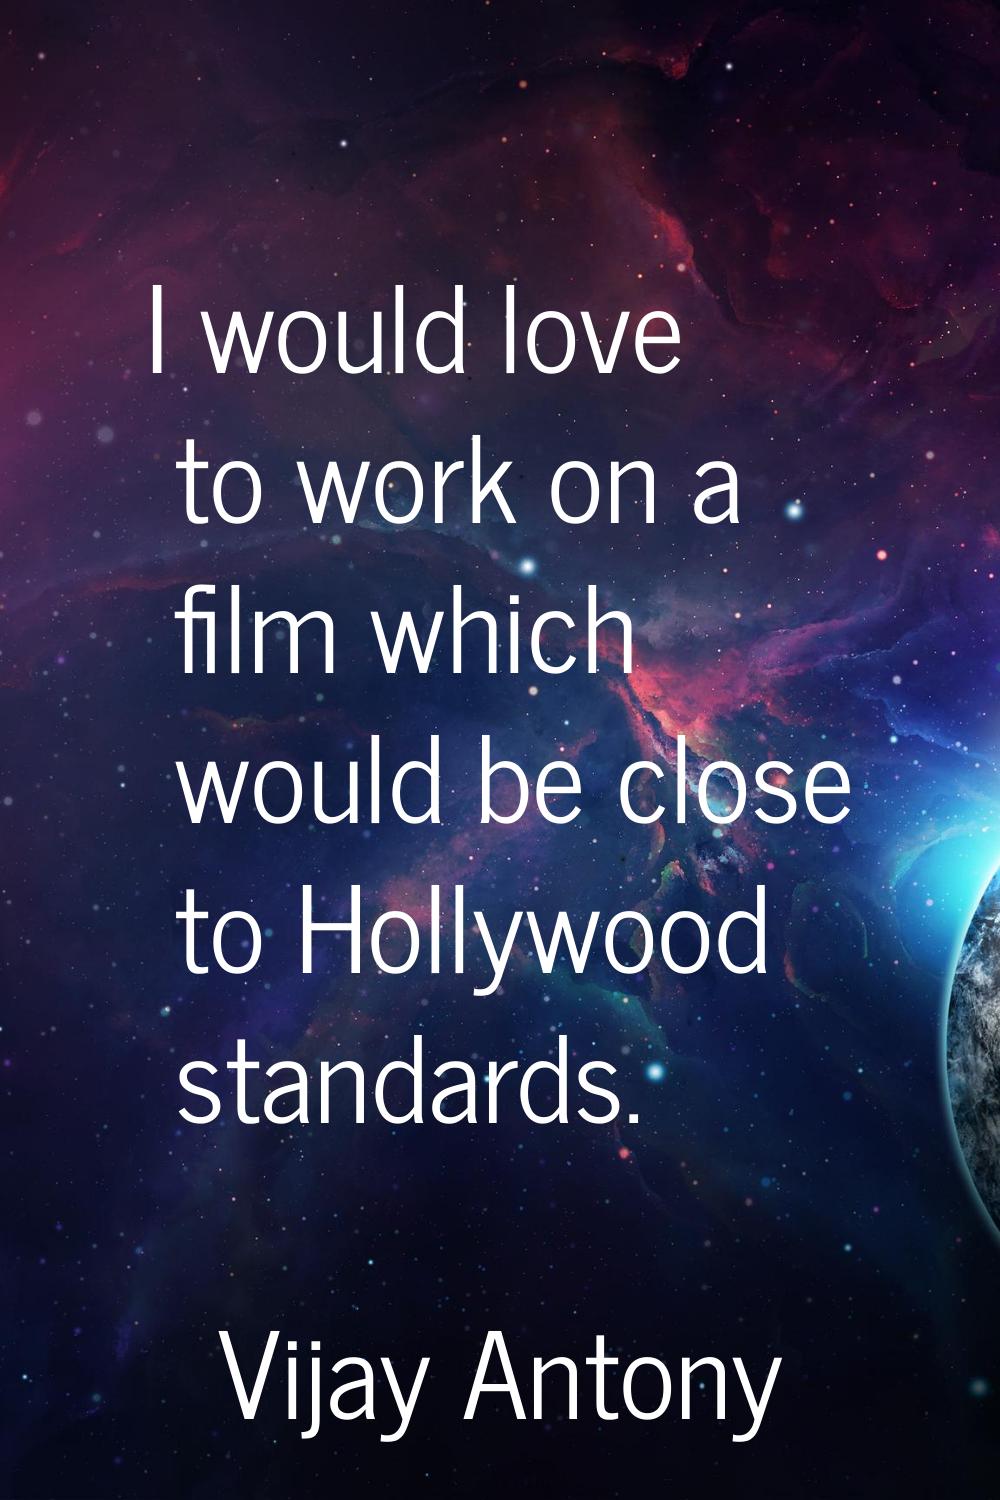 I would love to work on a film which would be close to Hollywood standards.